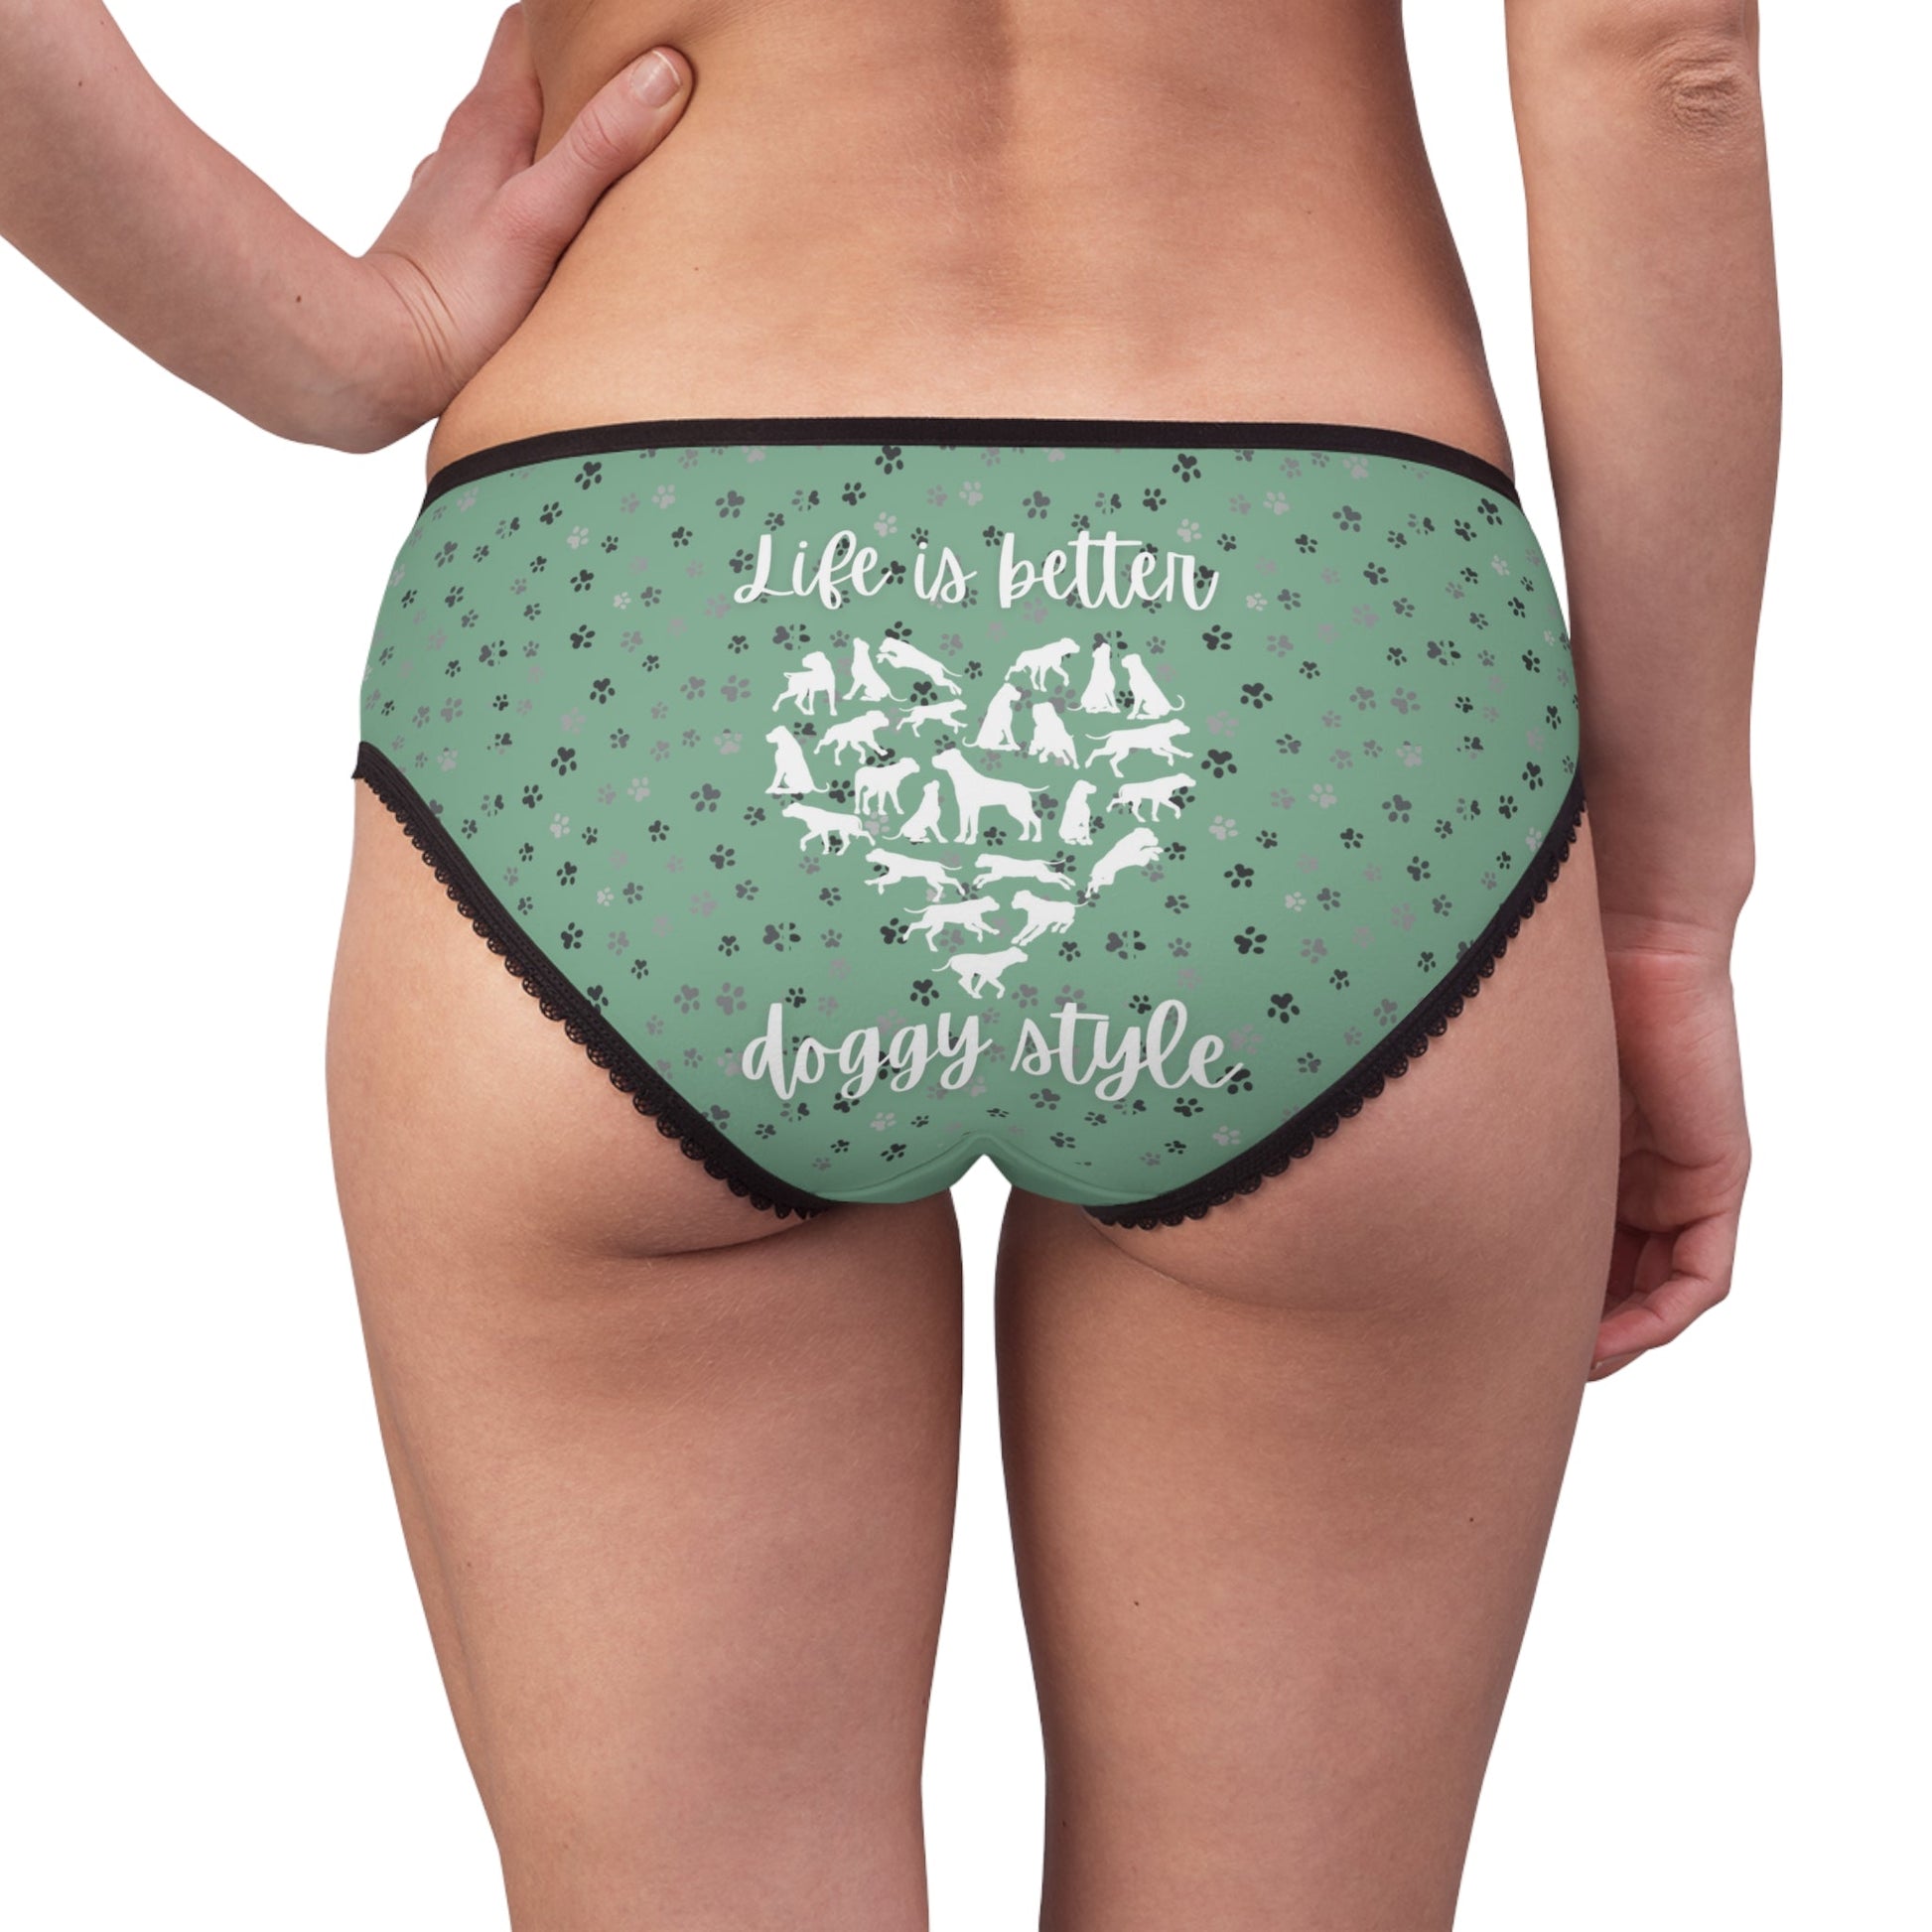 Life is Better Undies - All Over Prints